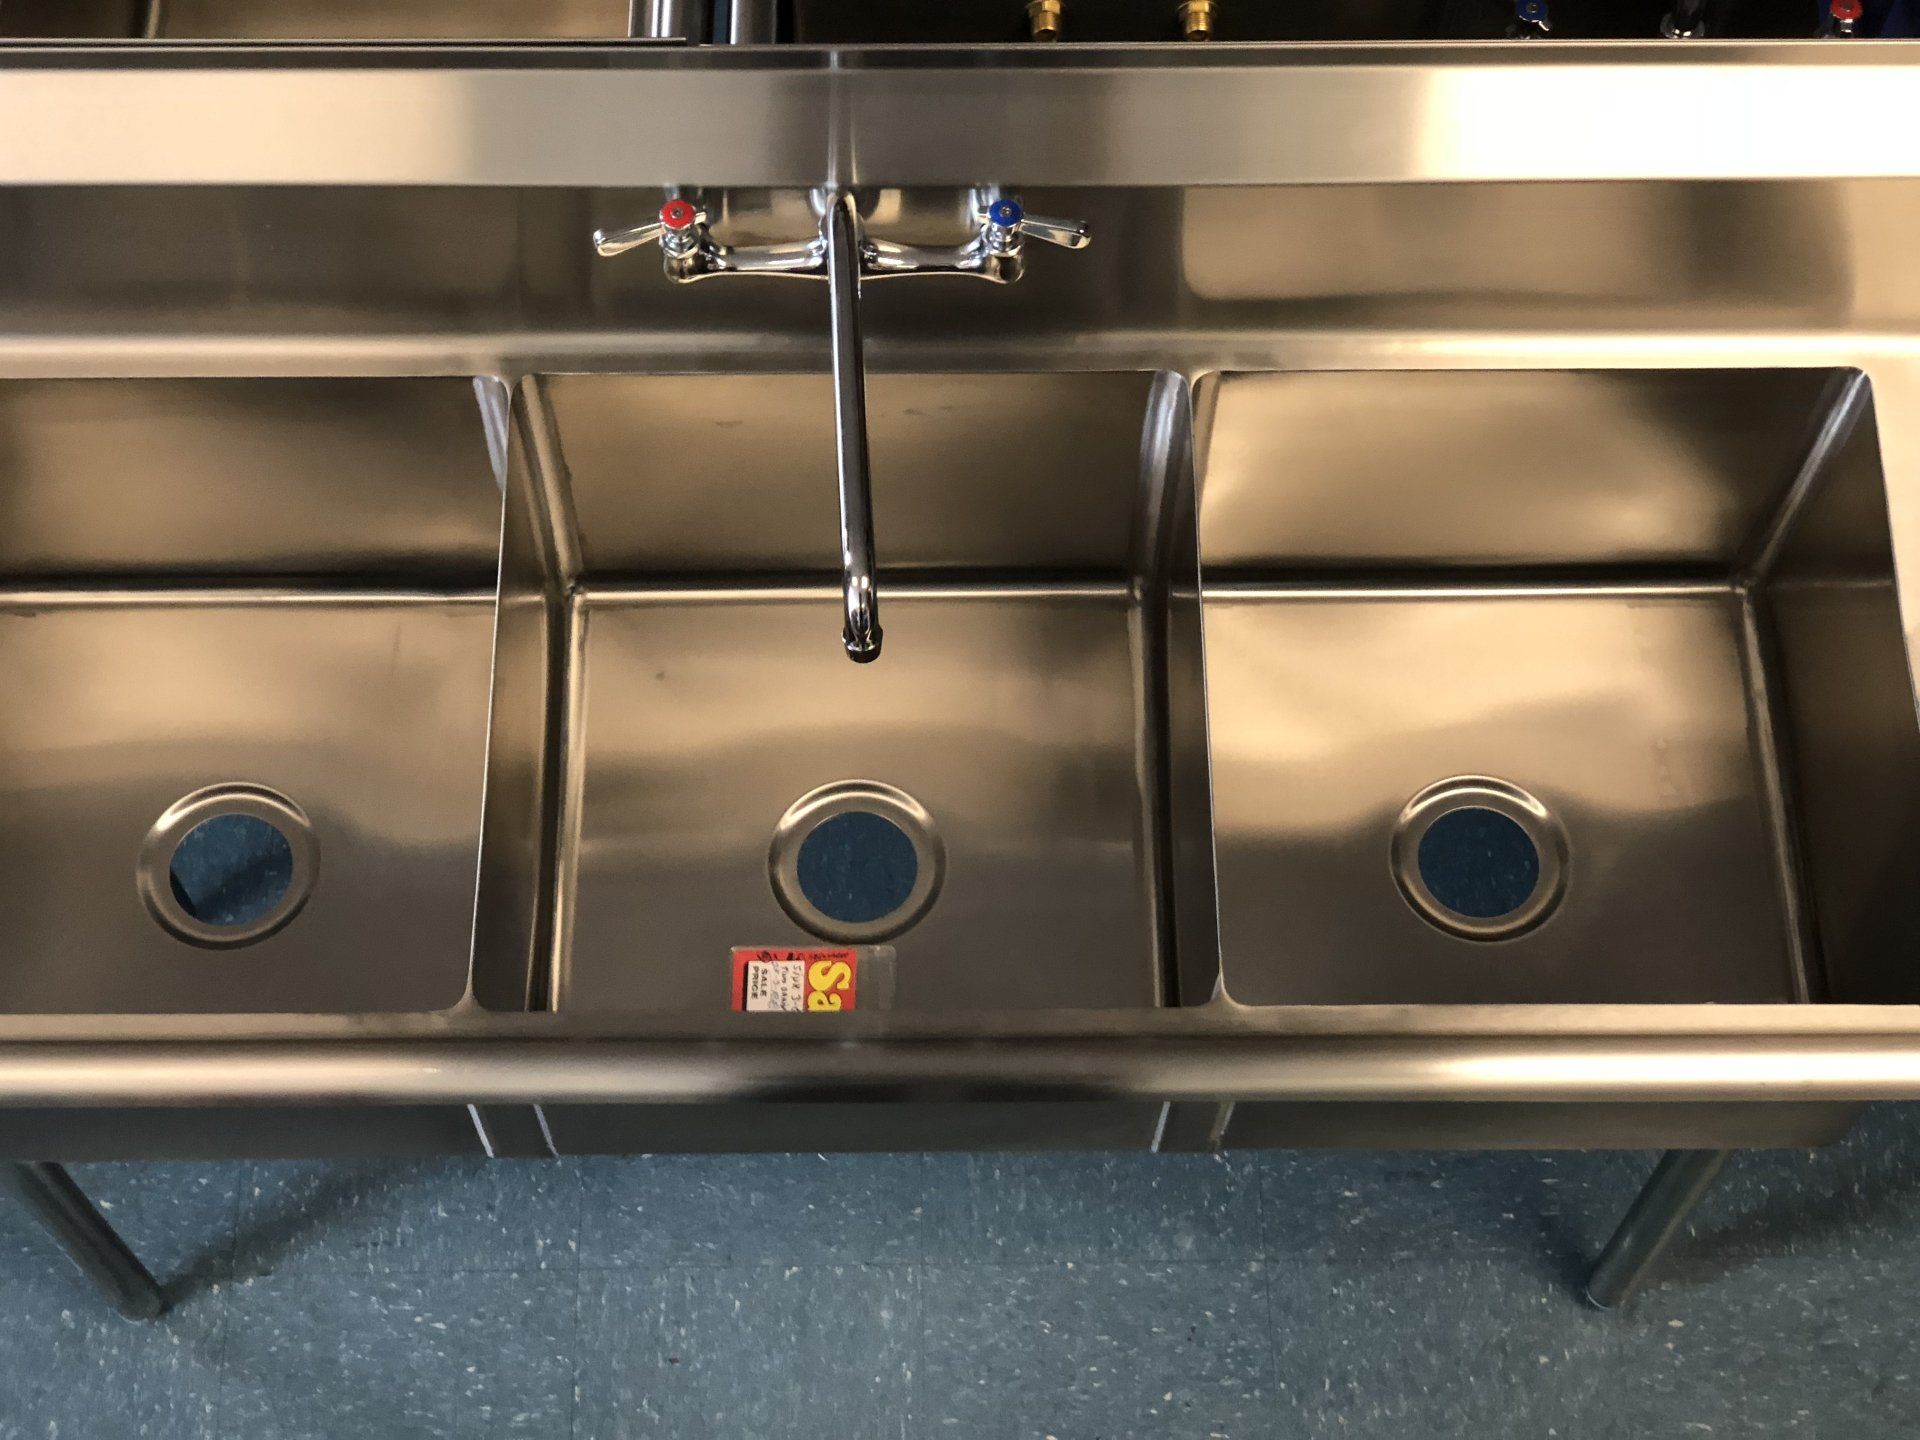 A stainless steel kitchen sink with three sinks and a faucet